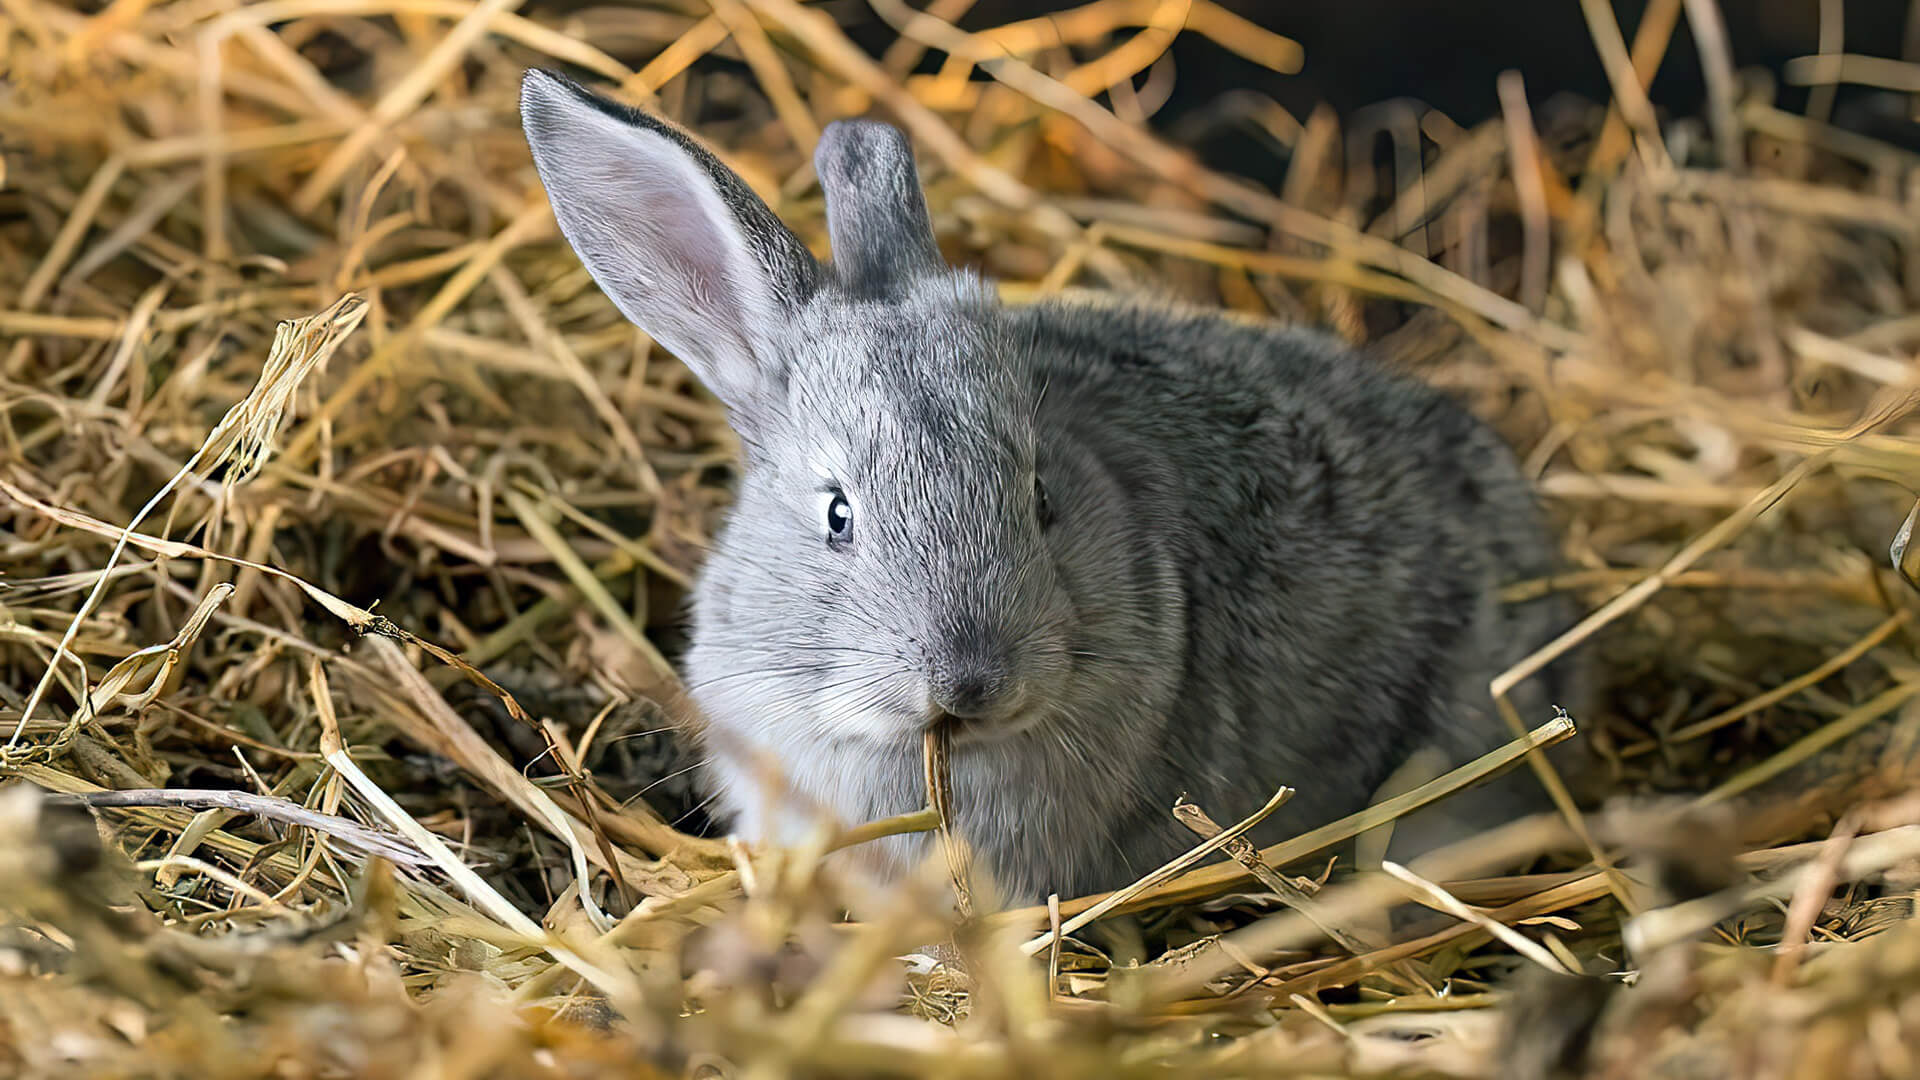 Rabbit Bedding Options: What To Look For In Rabbit Litter & Straw